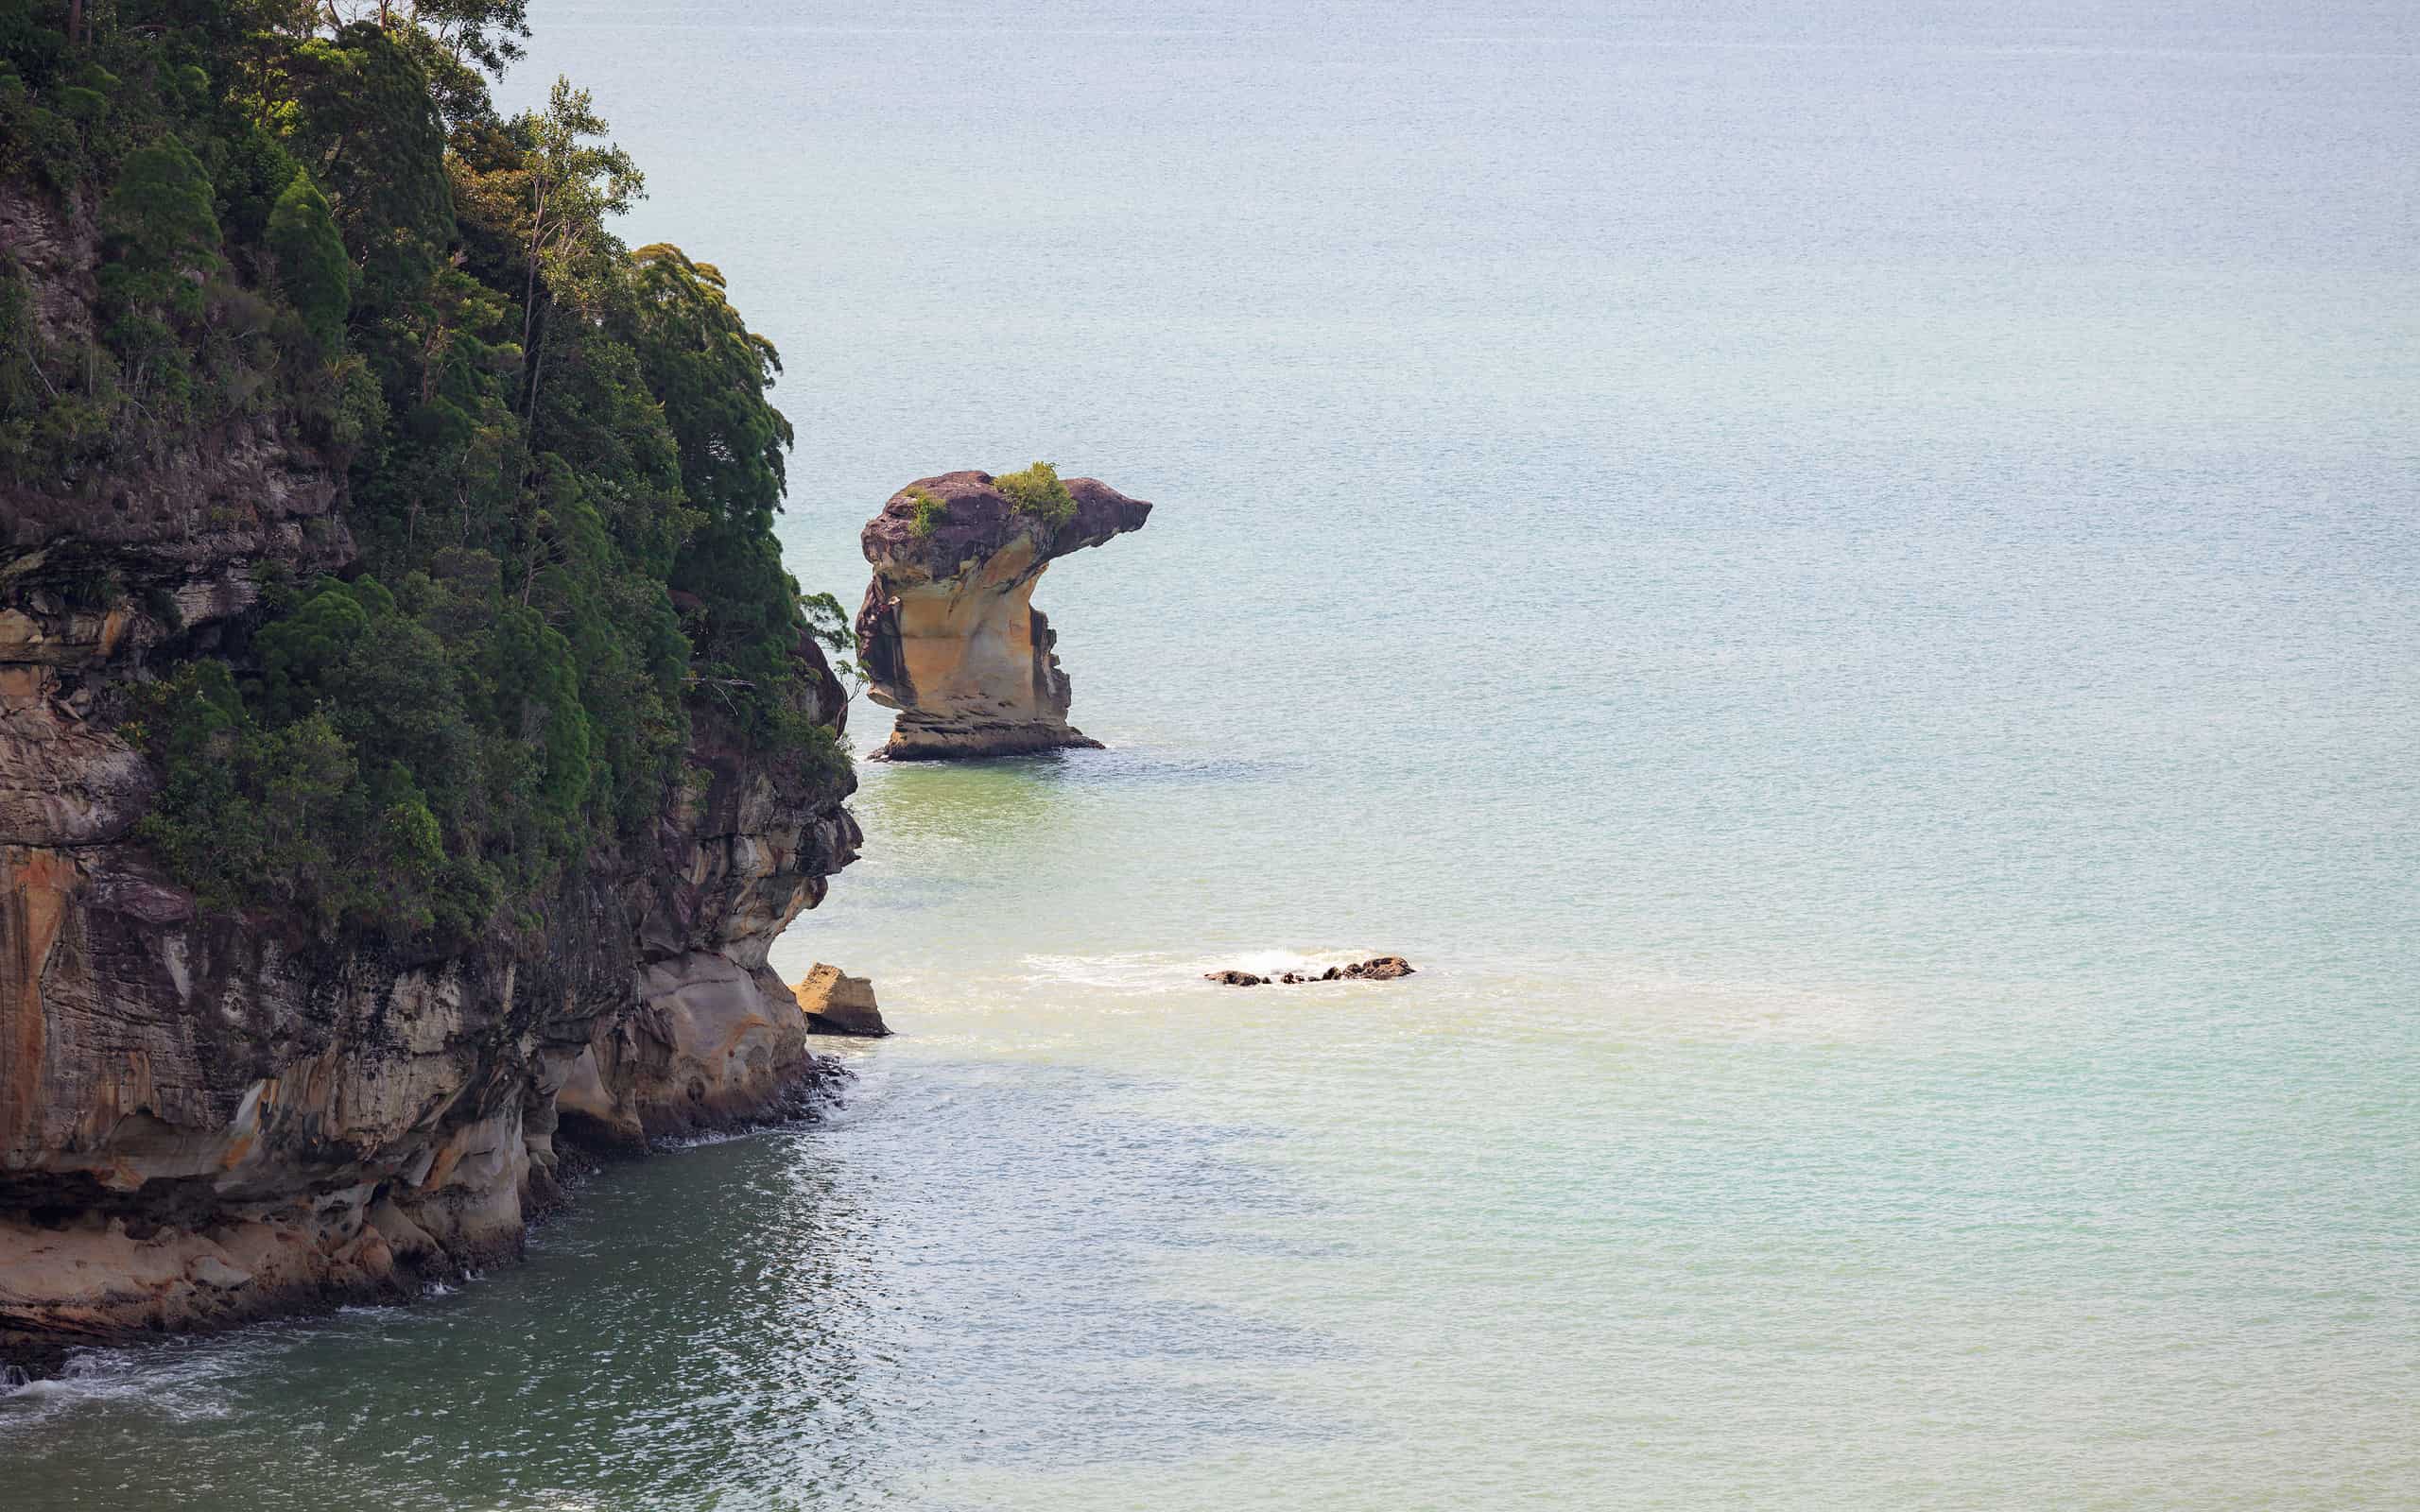 Sea stack rock formation in Bako national park Malaysia